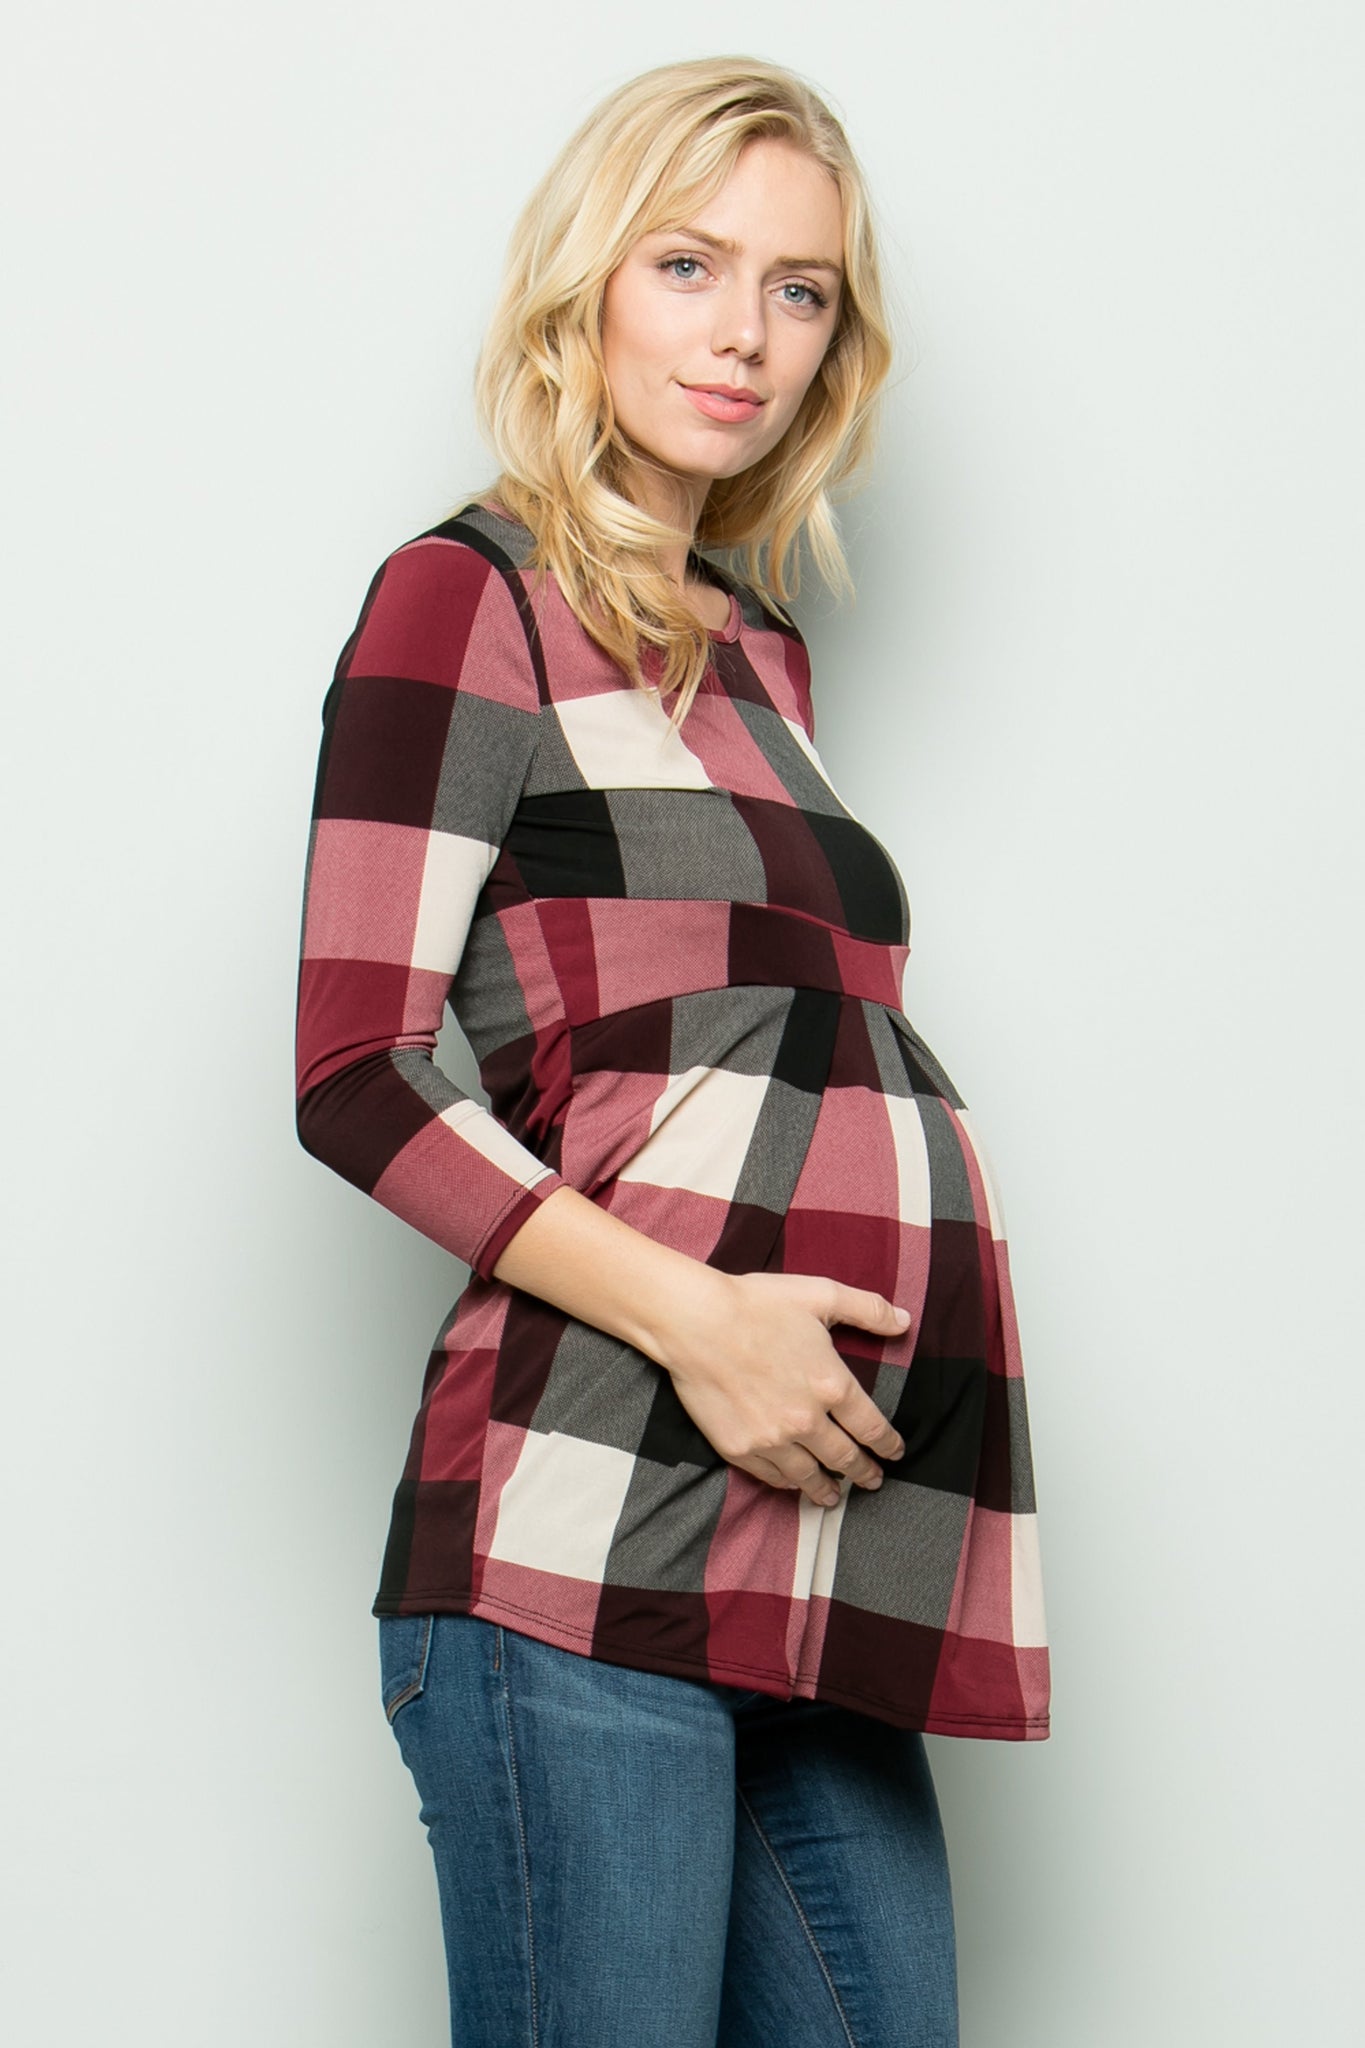 maternity pregnancy baby shower 3/4 long sleeve round neck crewneck pleated top shirt blouse